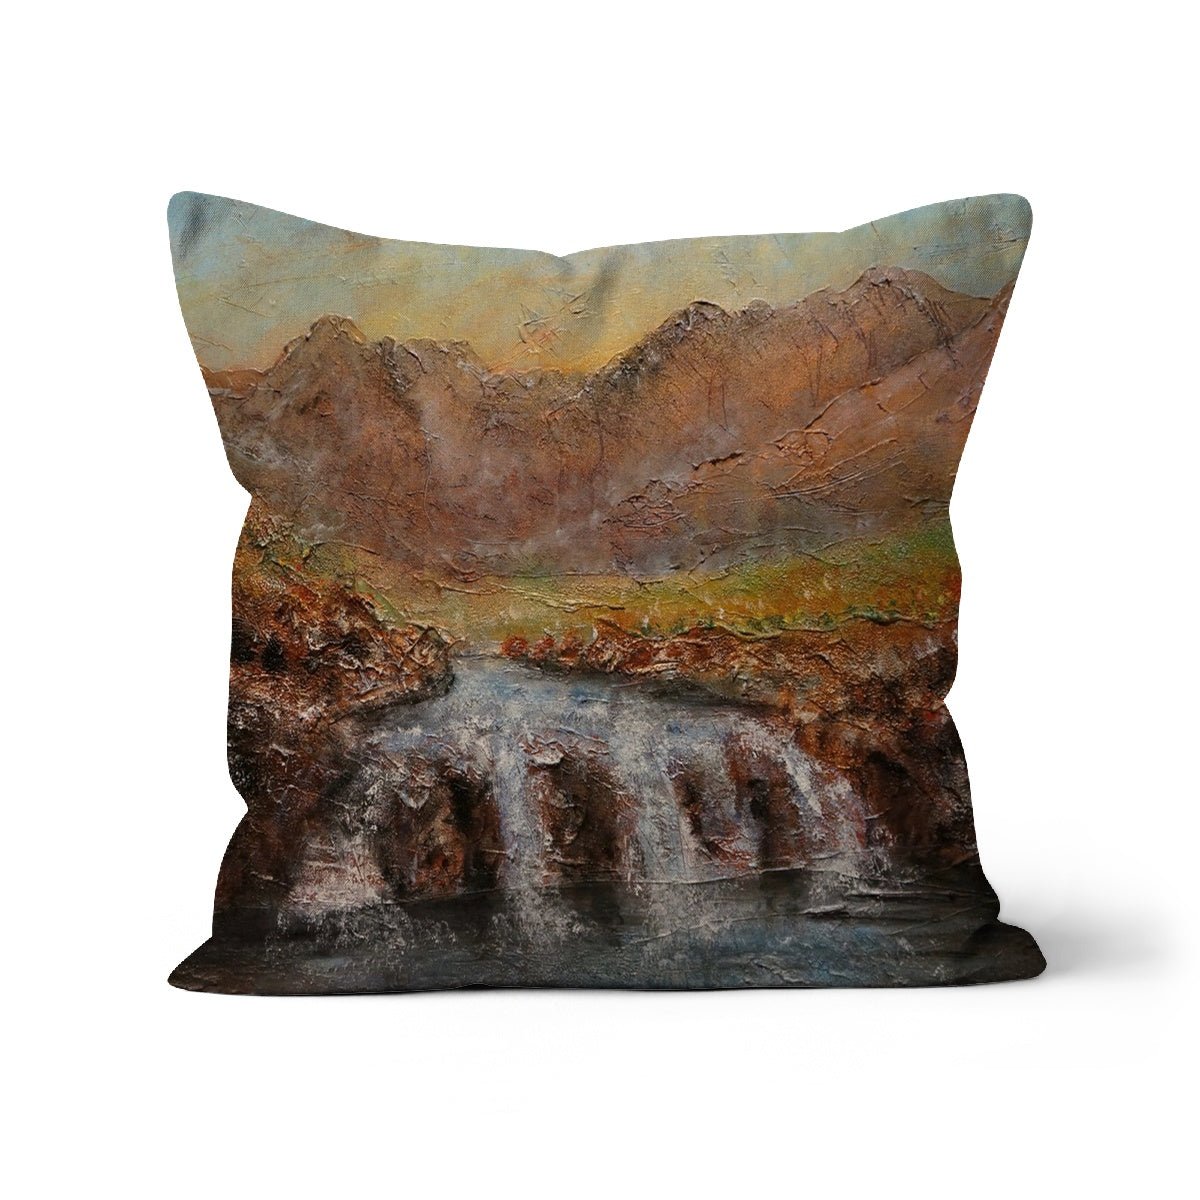 Fairy Pools Dawn Skye Art Gifts Cushion-Cushions-Skye Art Gallery-Faux Suede-12"x12"-Paintings, Prints, Homeware, Art Gifts From Scotland By Scottish Artist Kevin Hunter